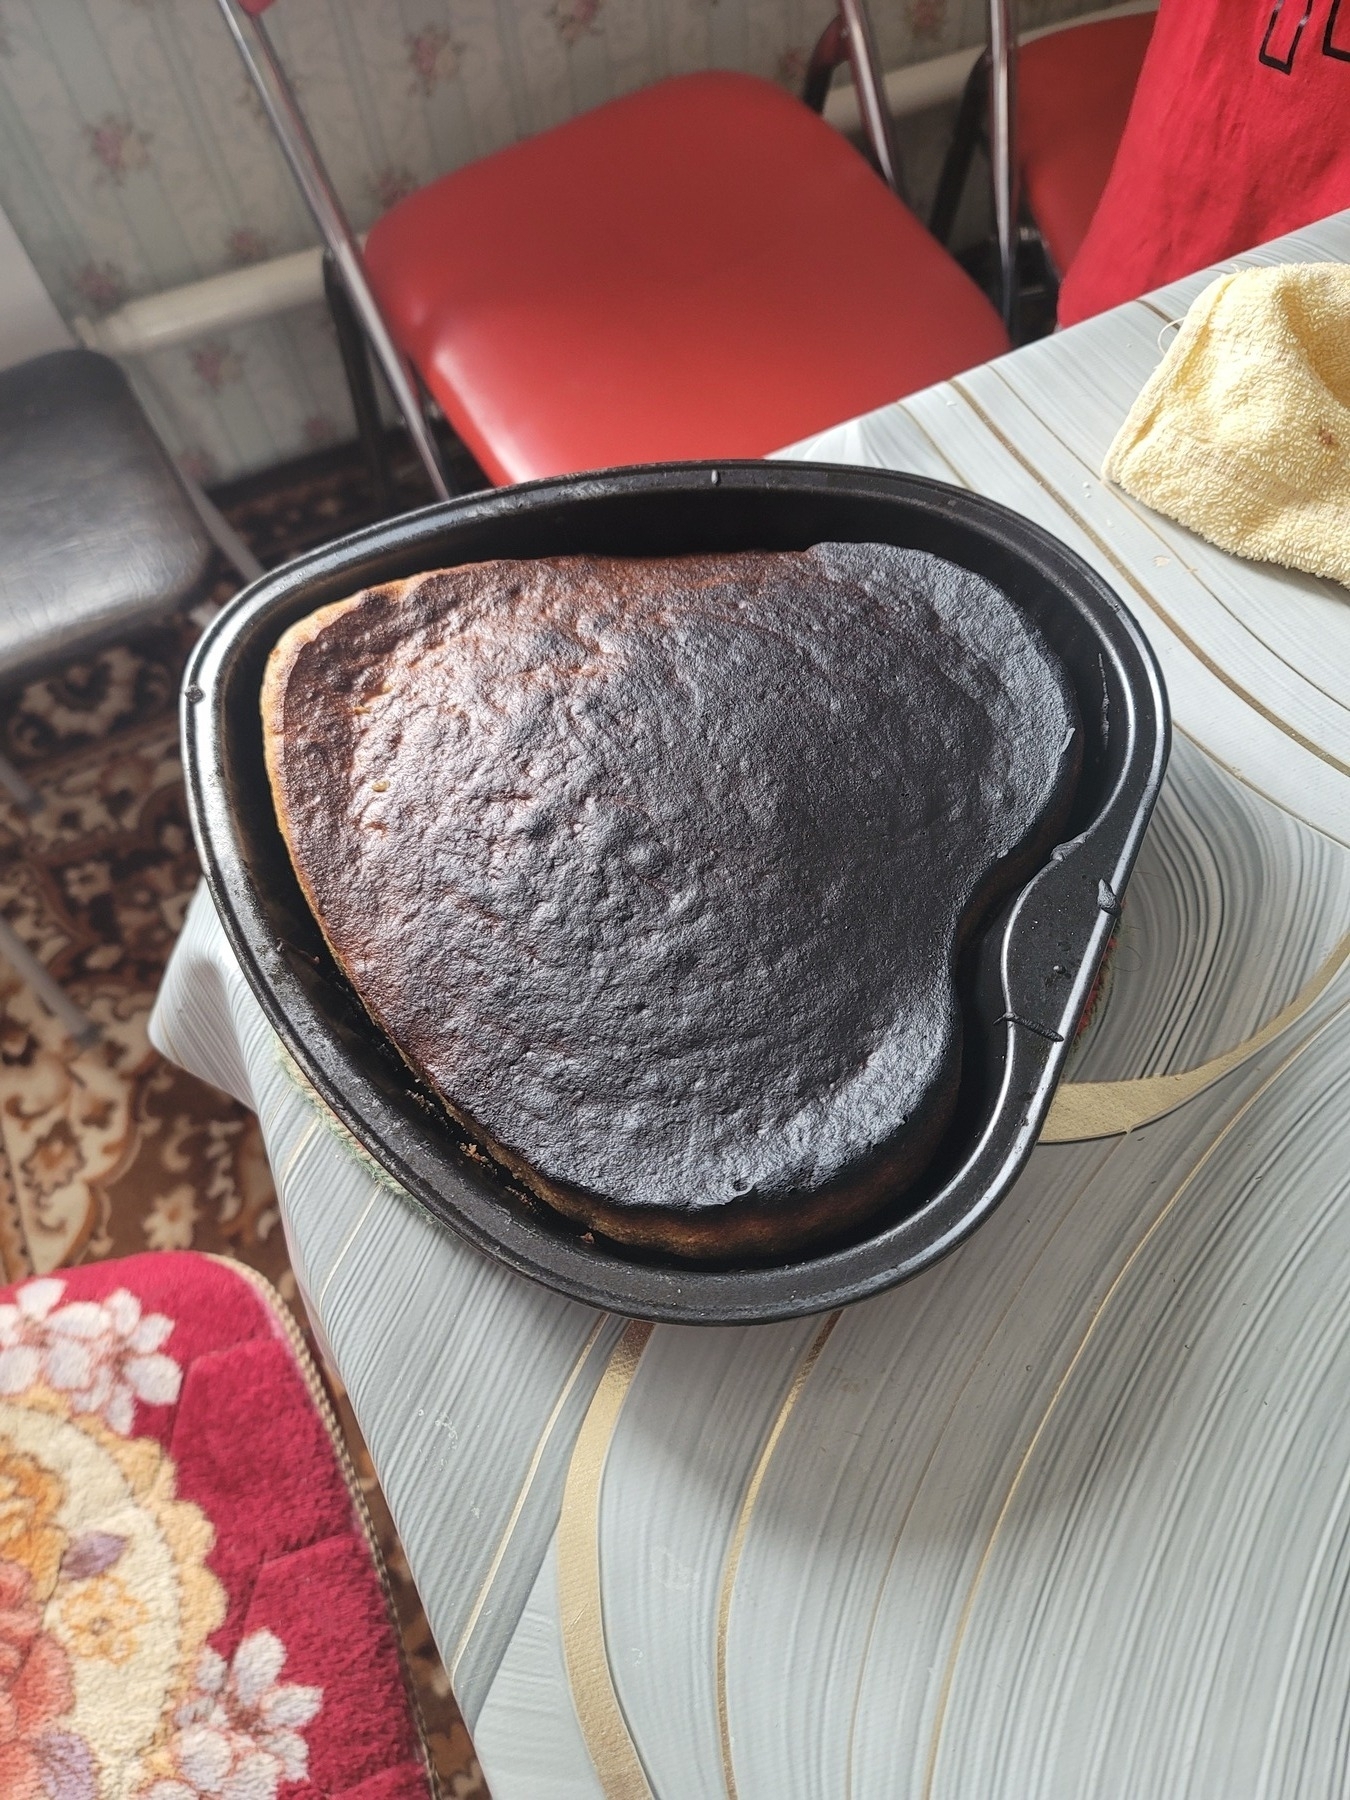 heart-shaped cake in a heart-shaped baking pan. the whole top of the cake is dark, but the top half is significantly darker than the bottom half